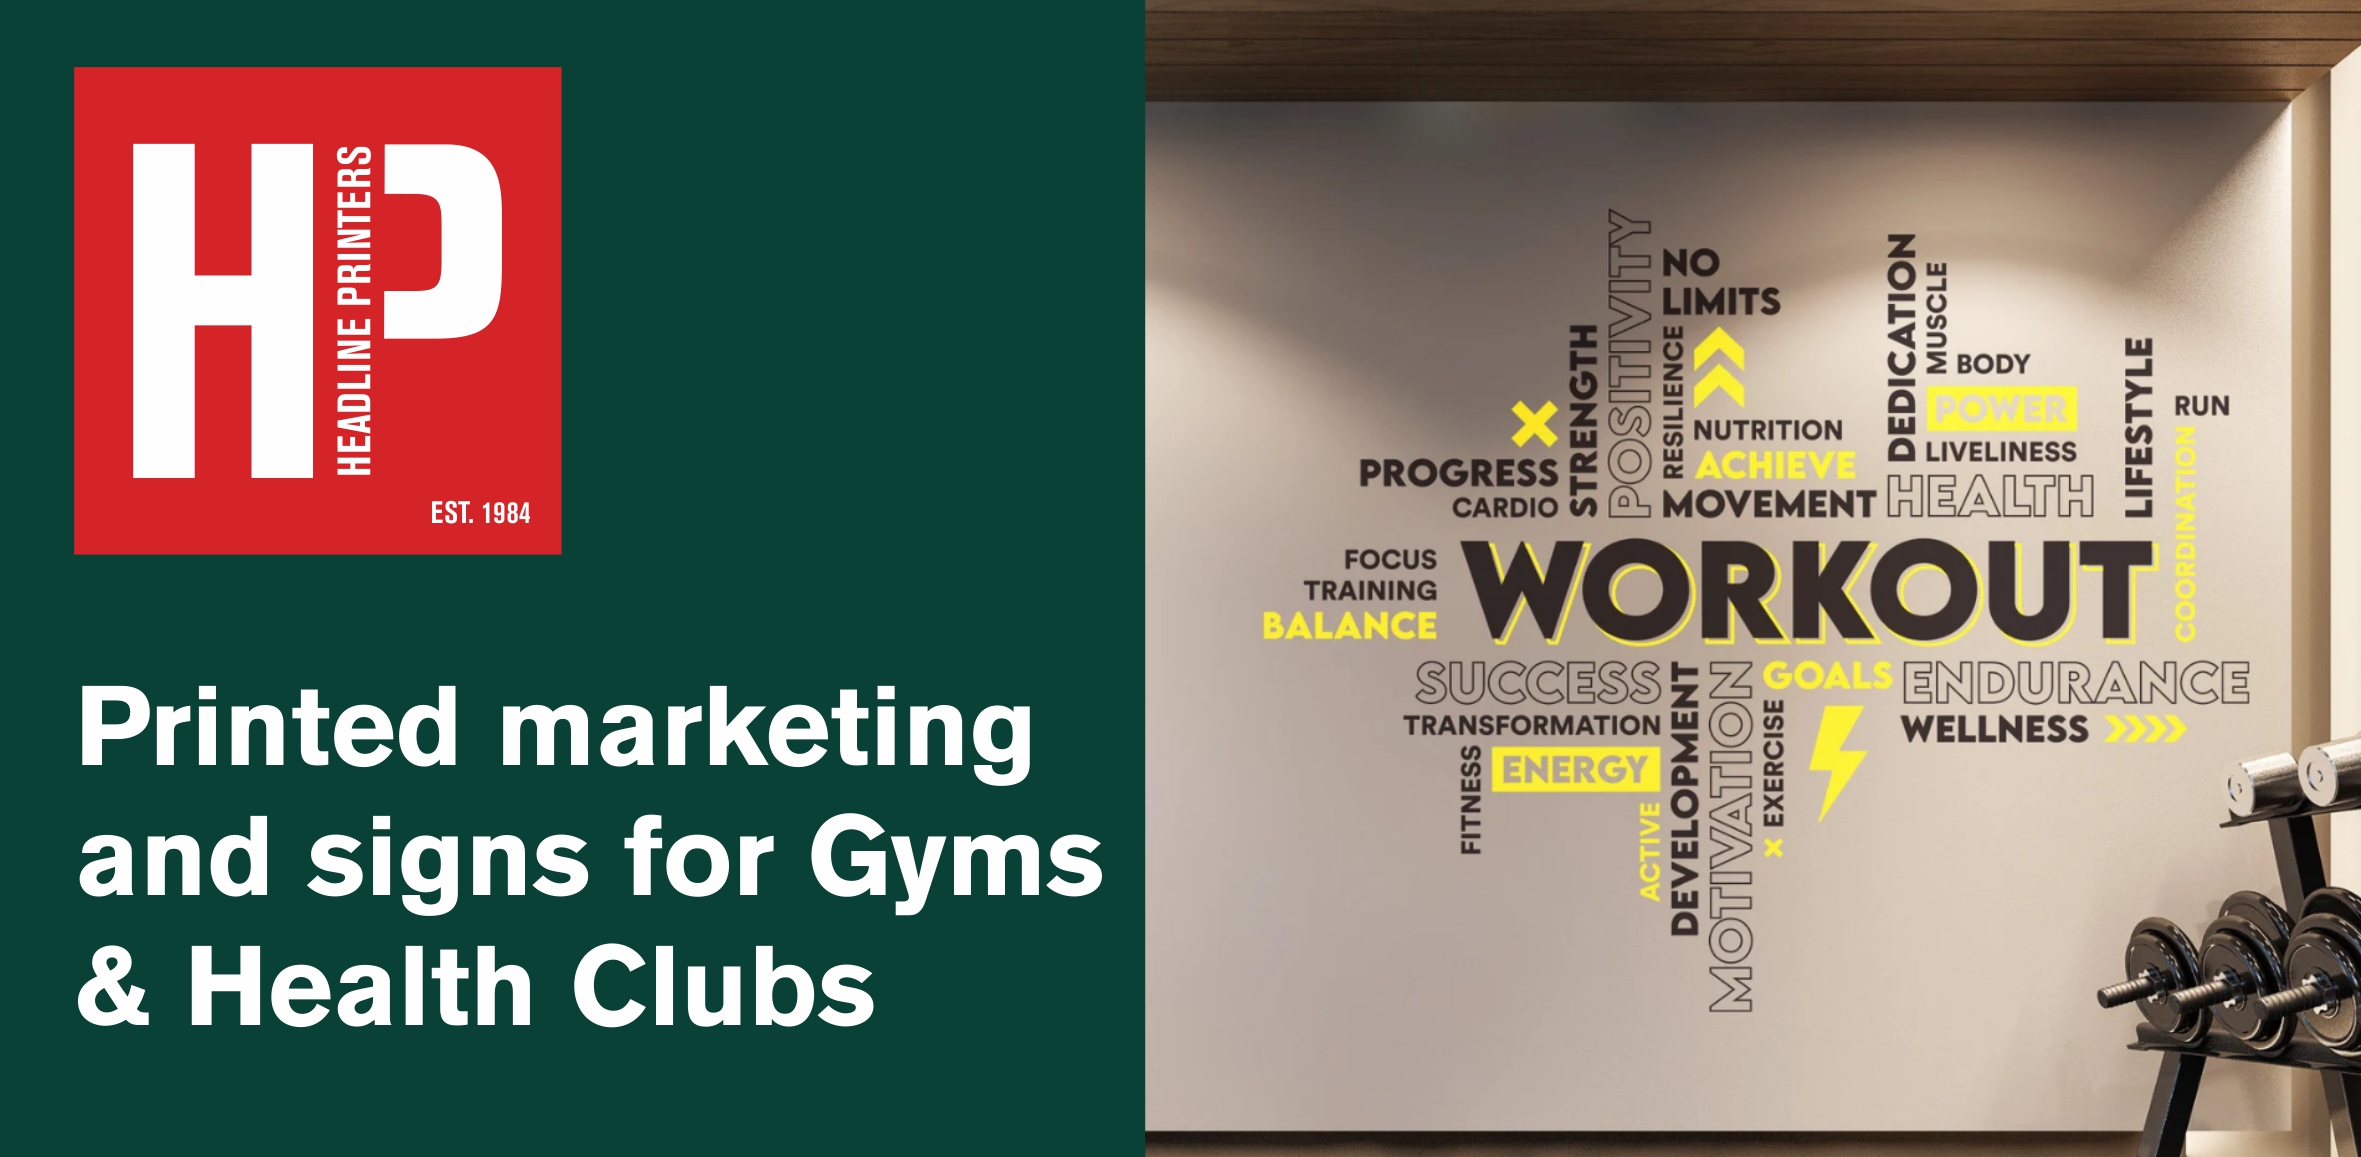 Printed marketing and signs for Gyms and Health Clubs